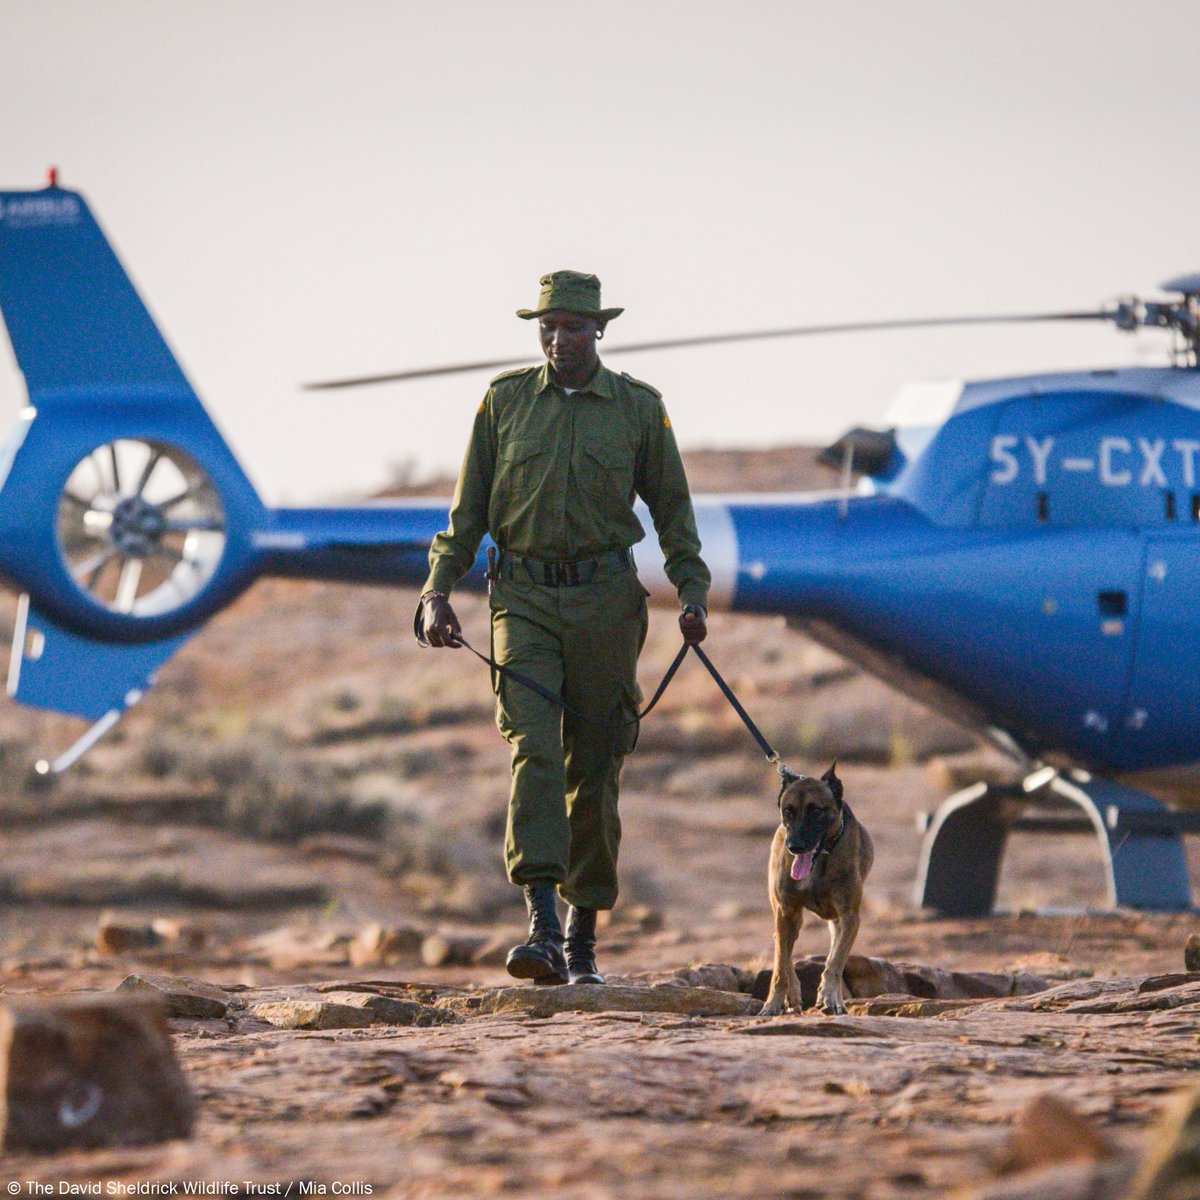 Our furry, four-legged members of our field teams are vital in the fight to stop wildlife crime. Get to know some of the team members and find out how we care for our anti-poaching pooches: sheldrickwildlifetrust.org/projects/canin… #wildlifewarriors